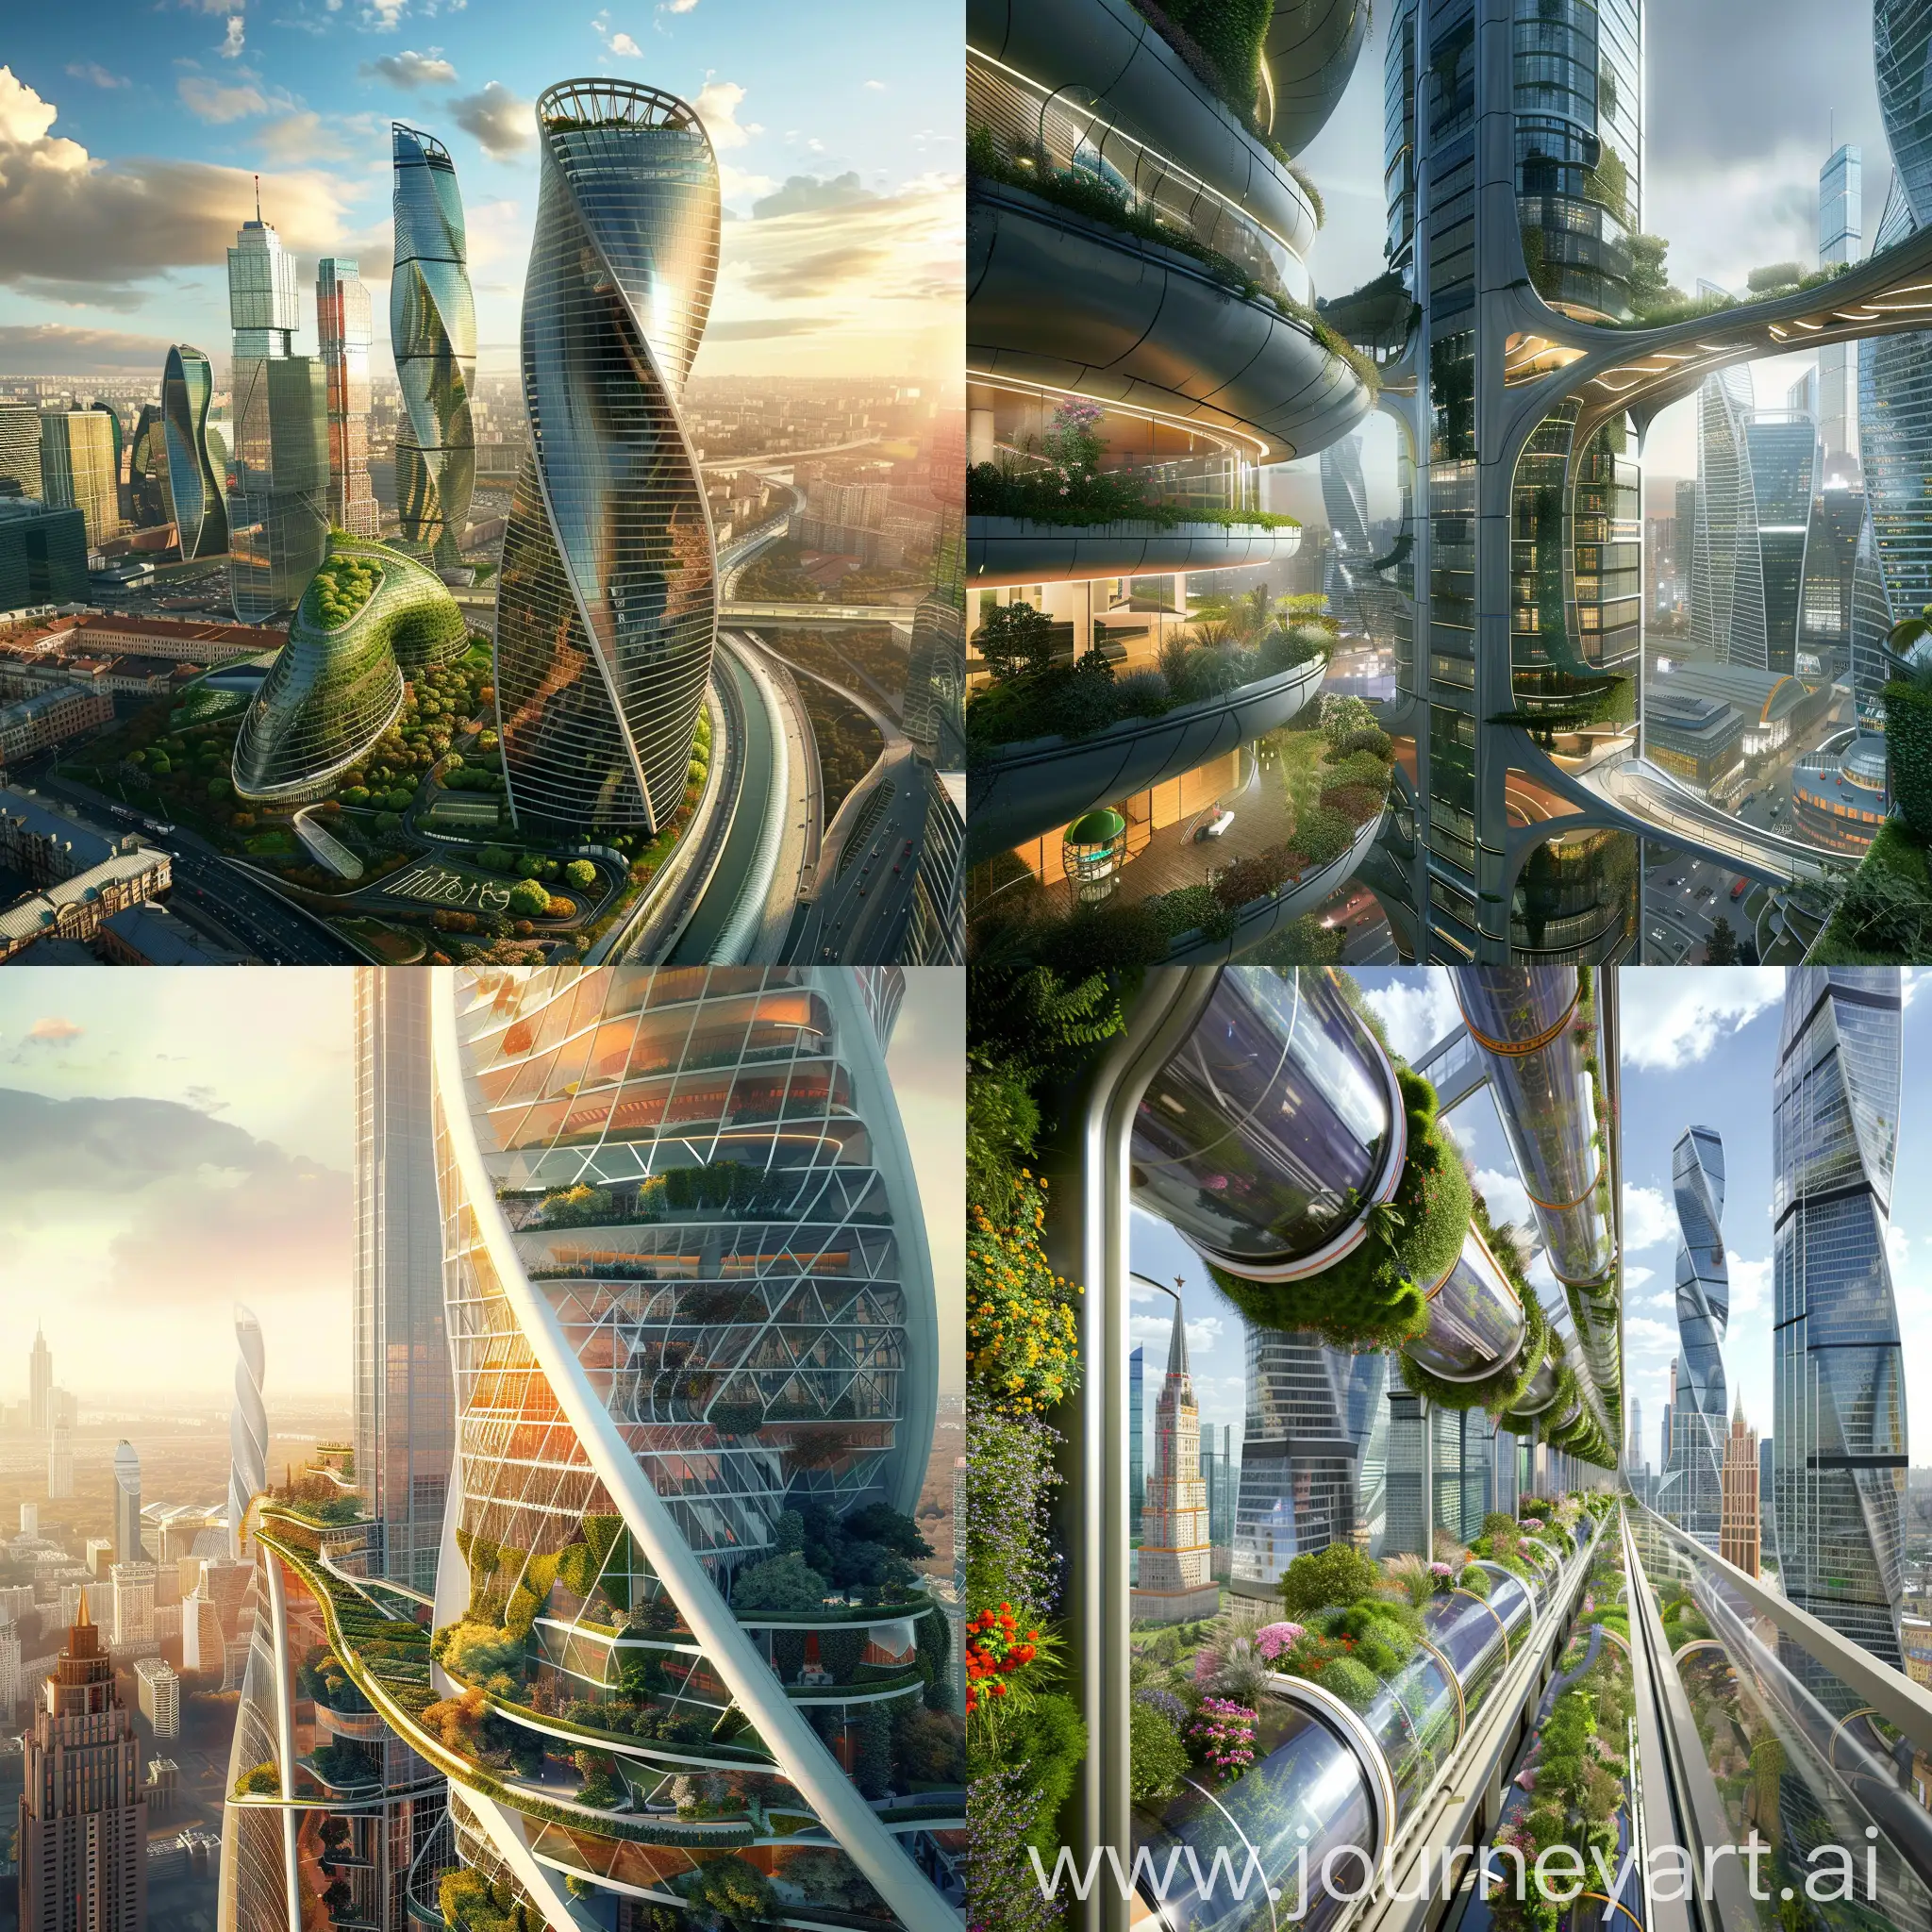 Futuristic Moscow, Kinetic Architecture, Vertical Gardens, Flexible Living Spaces, Smart Homes, Biomimetic Design, Hyperconnectivity, Modular Furniture, 3D-Printed Interiors, Virtual Reality Integration, Transparency and Light, Aerodynamic Skyscrapers, Self-Illuminating Facades, Vertical Transportation System, Kinetic Skins, Skybridges and Walkways, Green Roofs and Vertical Gardens, Landing Pads for Urban Air Taxis, Sustainable Materials, Interactive Public Art, Unified Urban Design, unreal engine 5 --stylize 1000